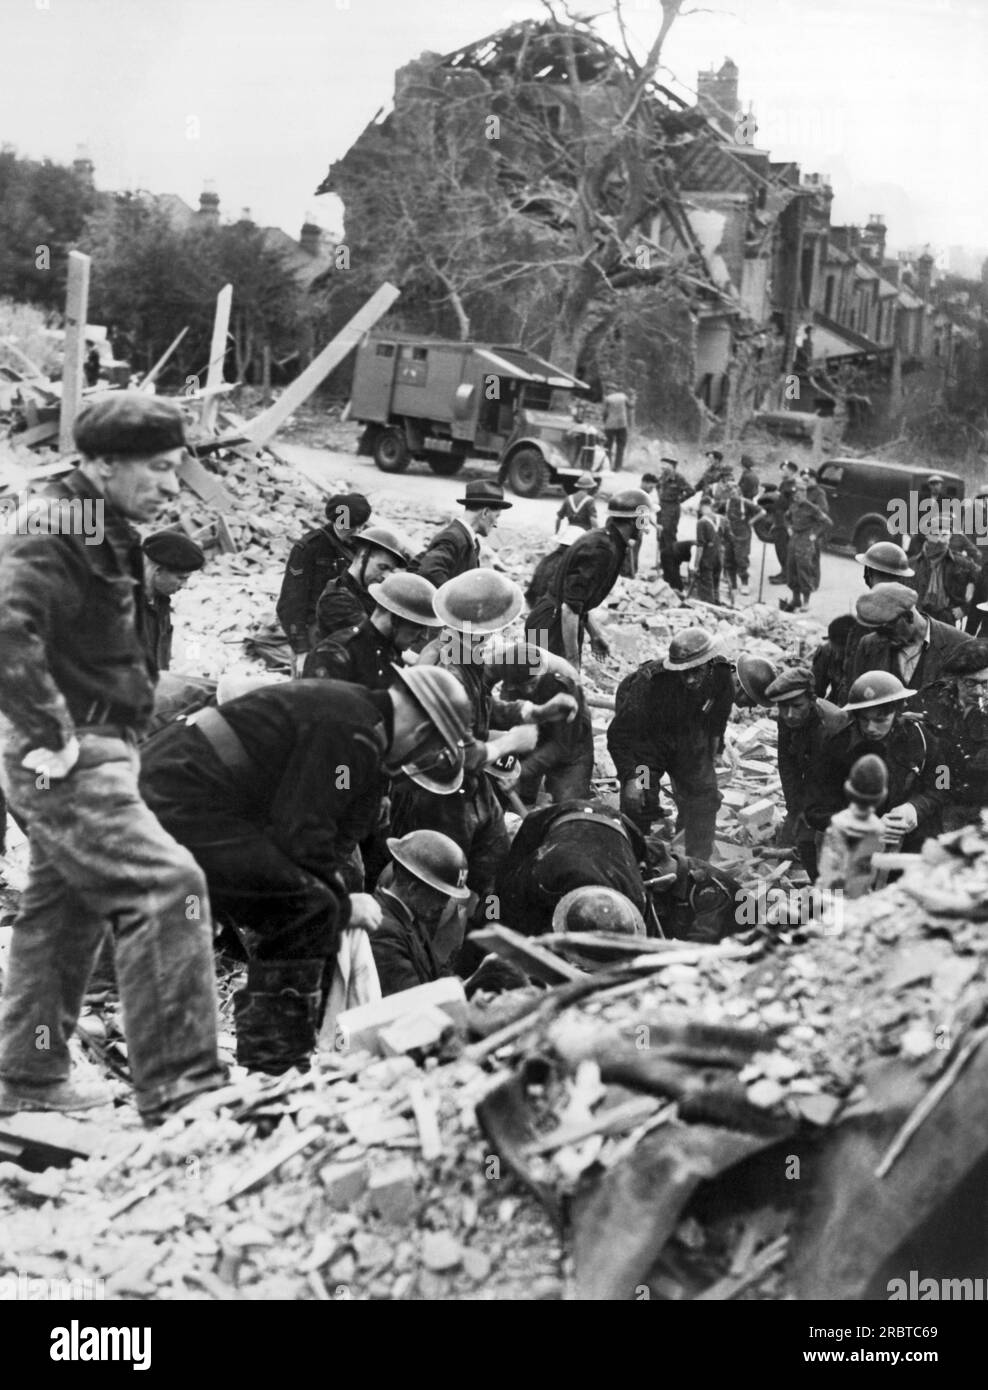 London, England:  c. 1943 Civil Defense rescue workers searching the ruins for victims and survivors after a German V-1 flying bomb hit London's Balham district. Stock Photo